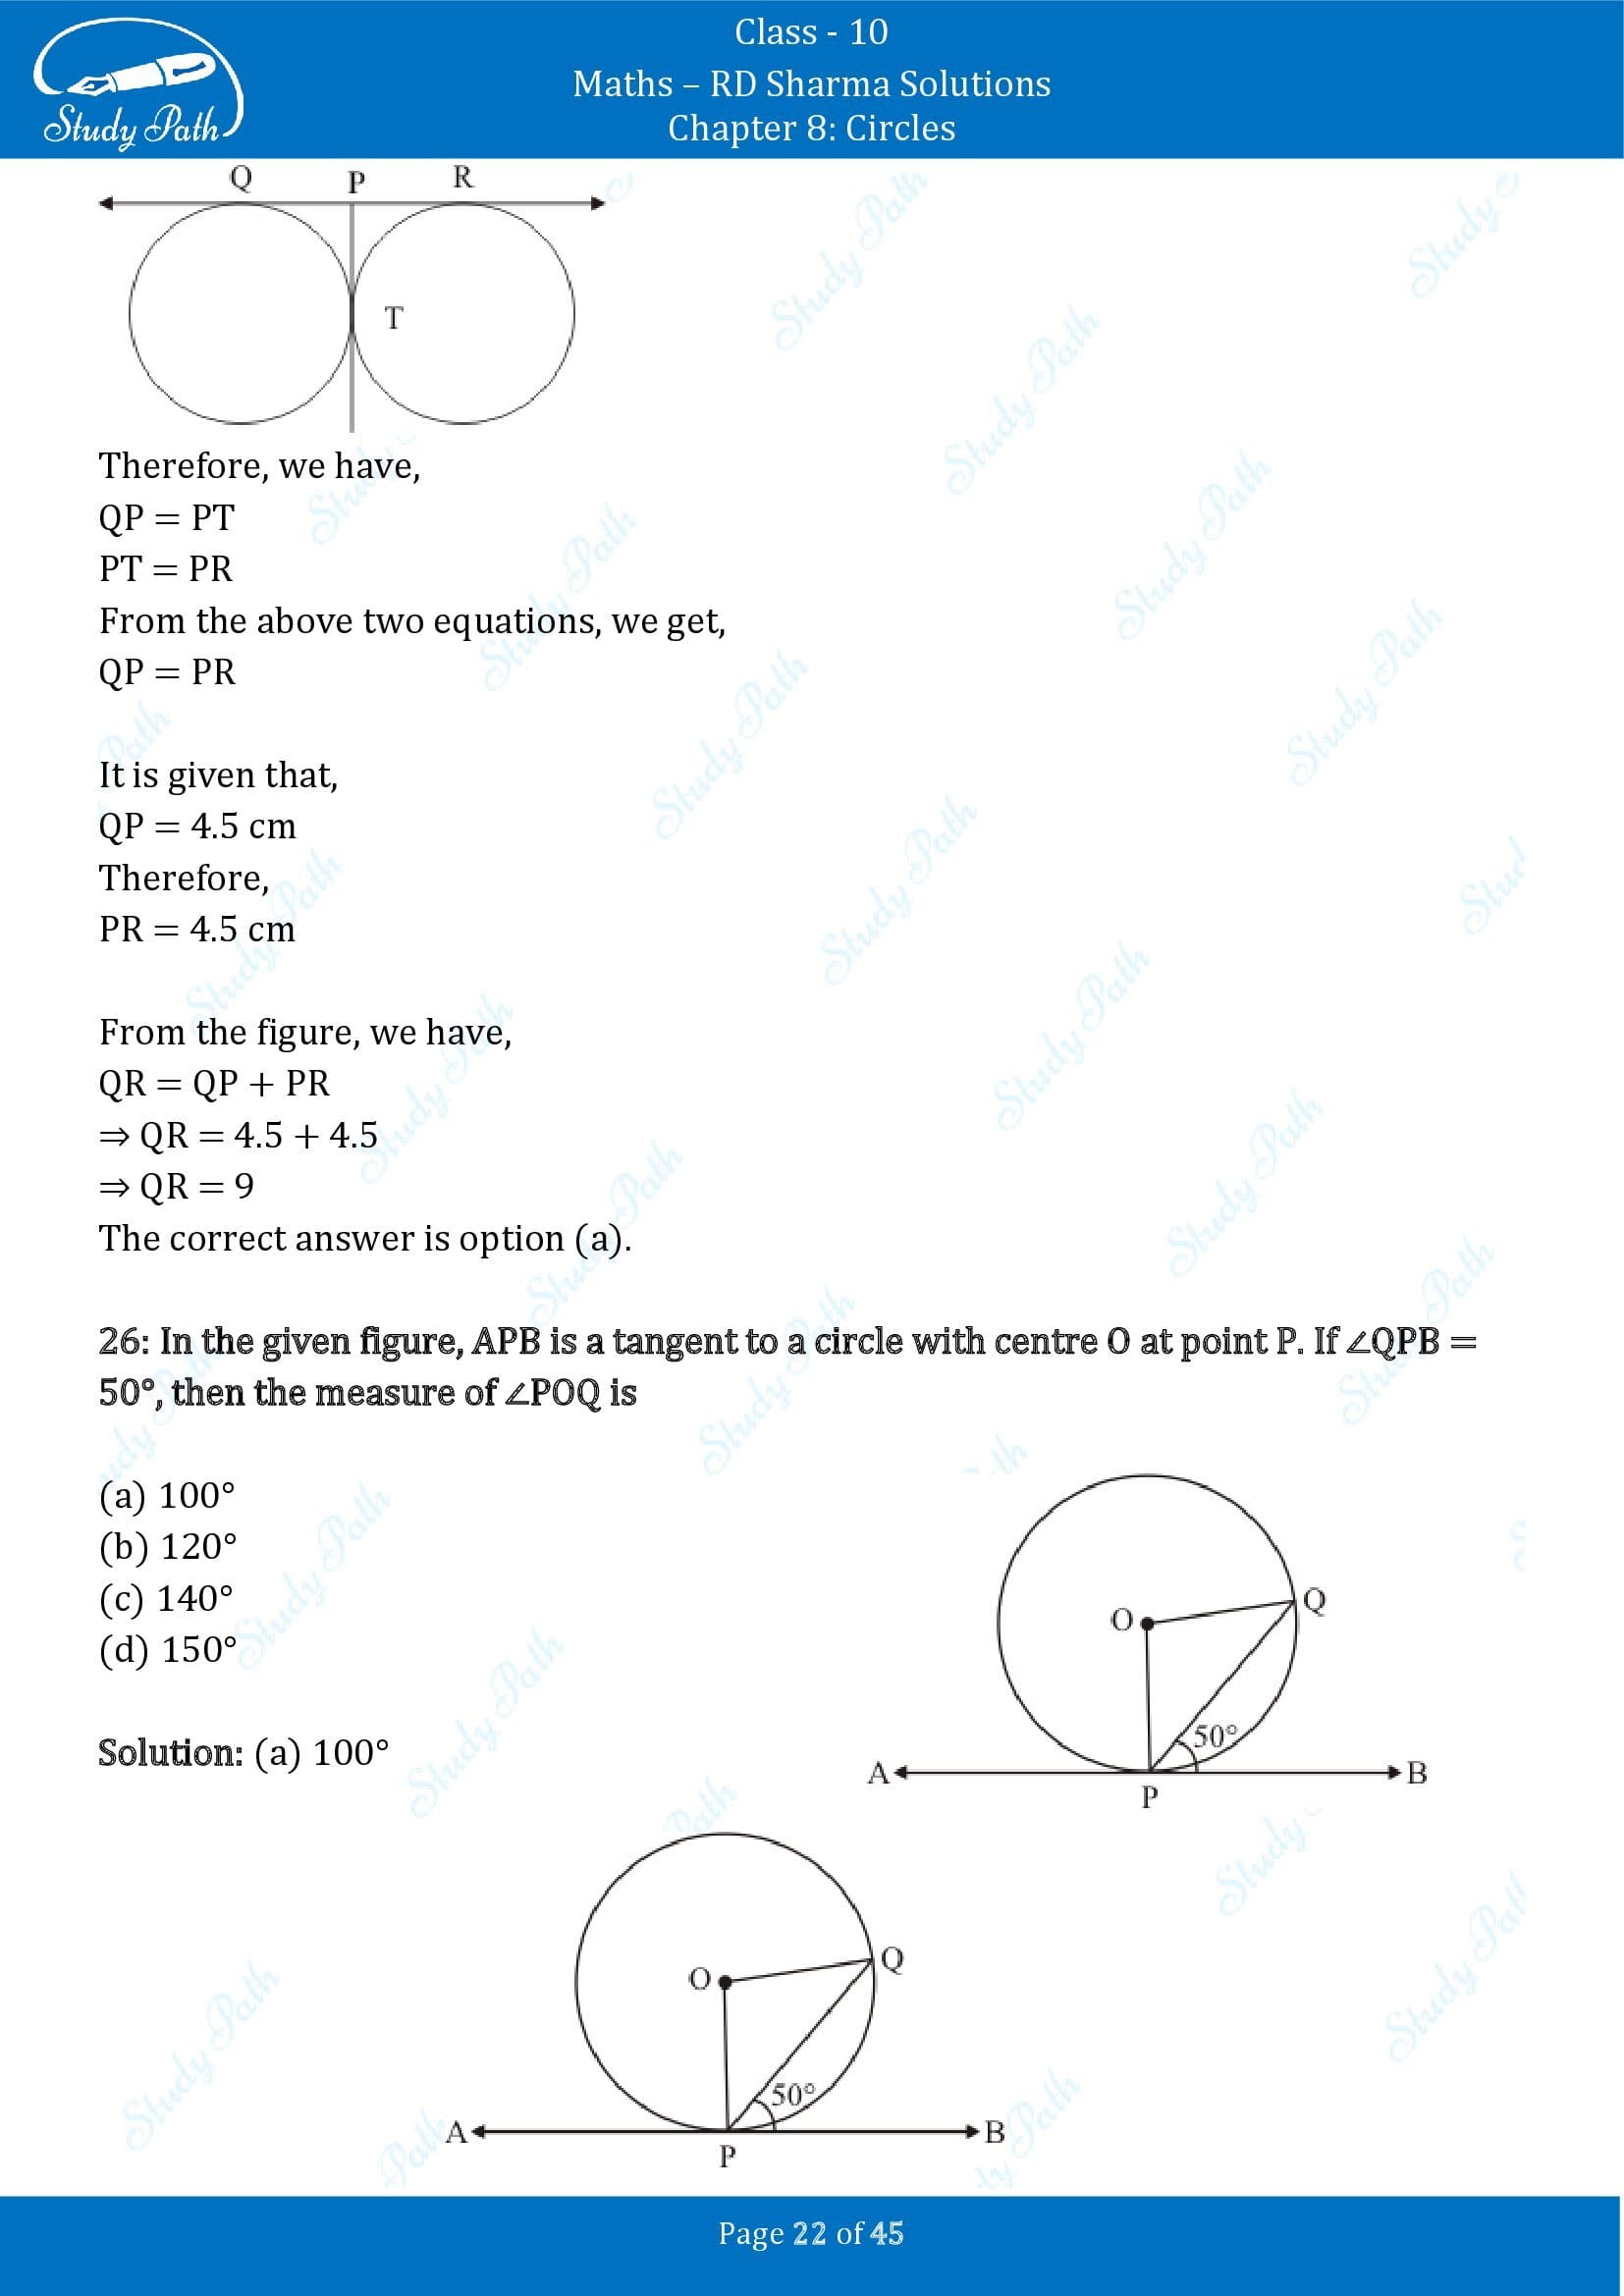 RD Sharma Solutions Class 10 Chapter 8 Circles Multiple Choice Questions MCQs 00022